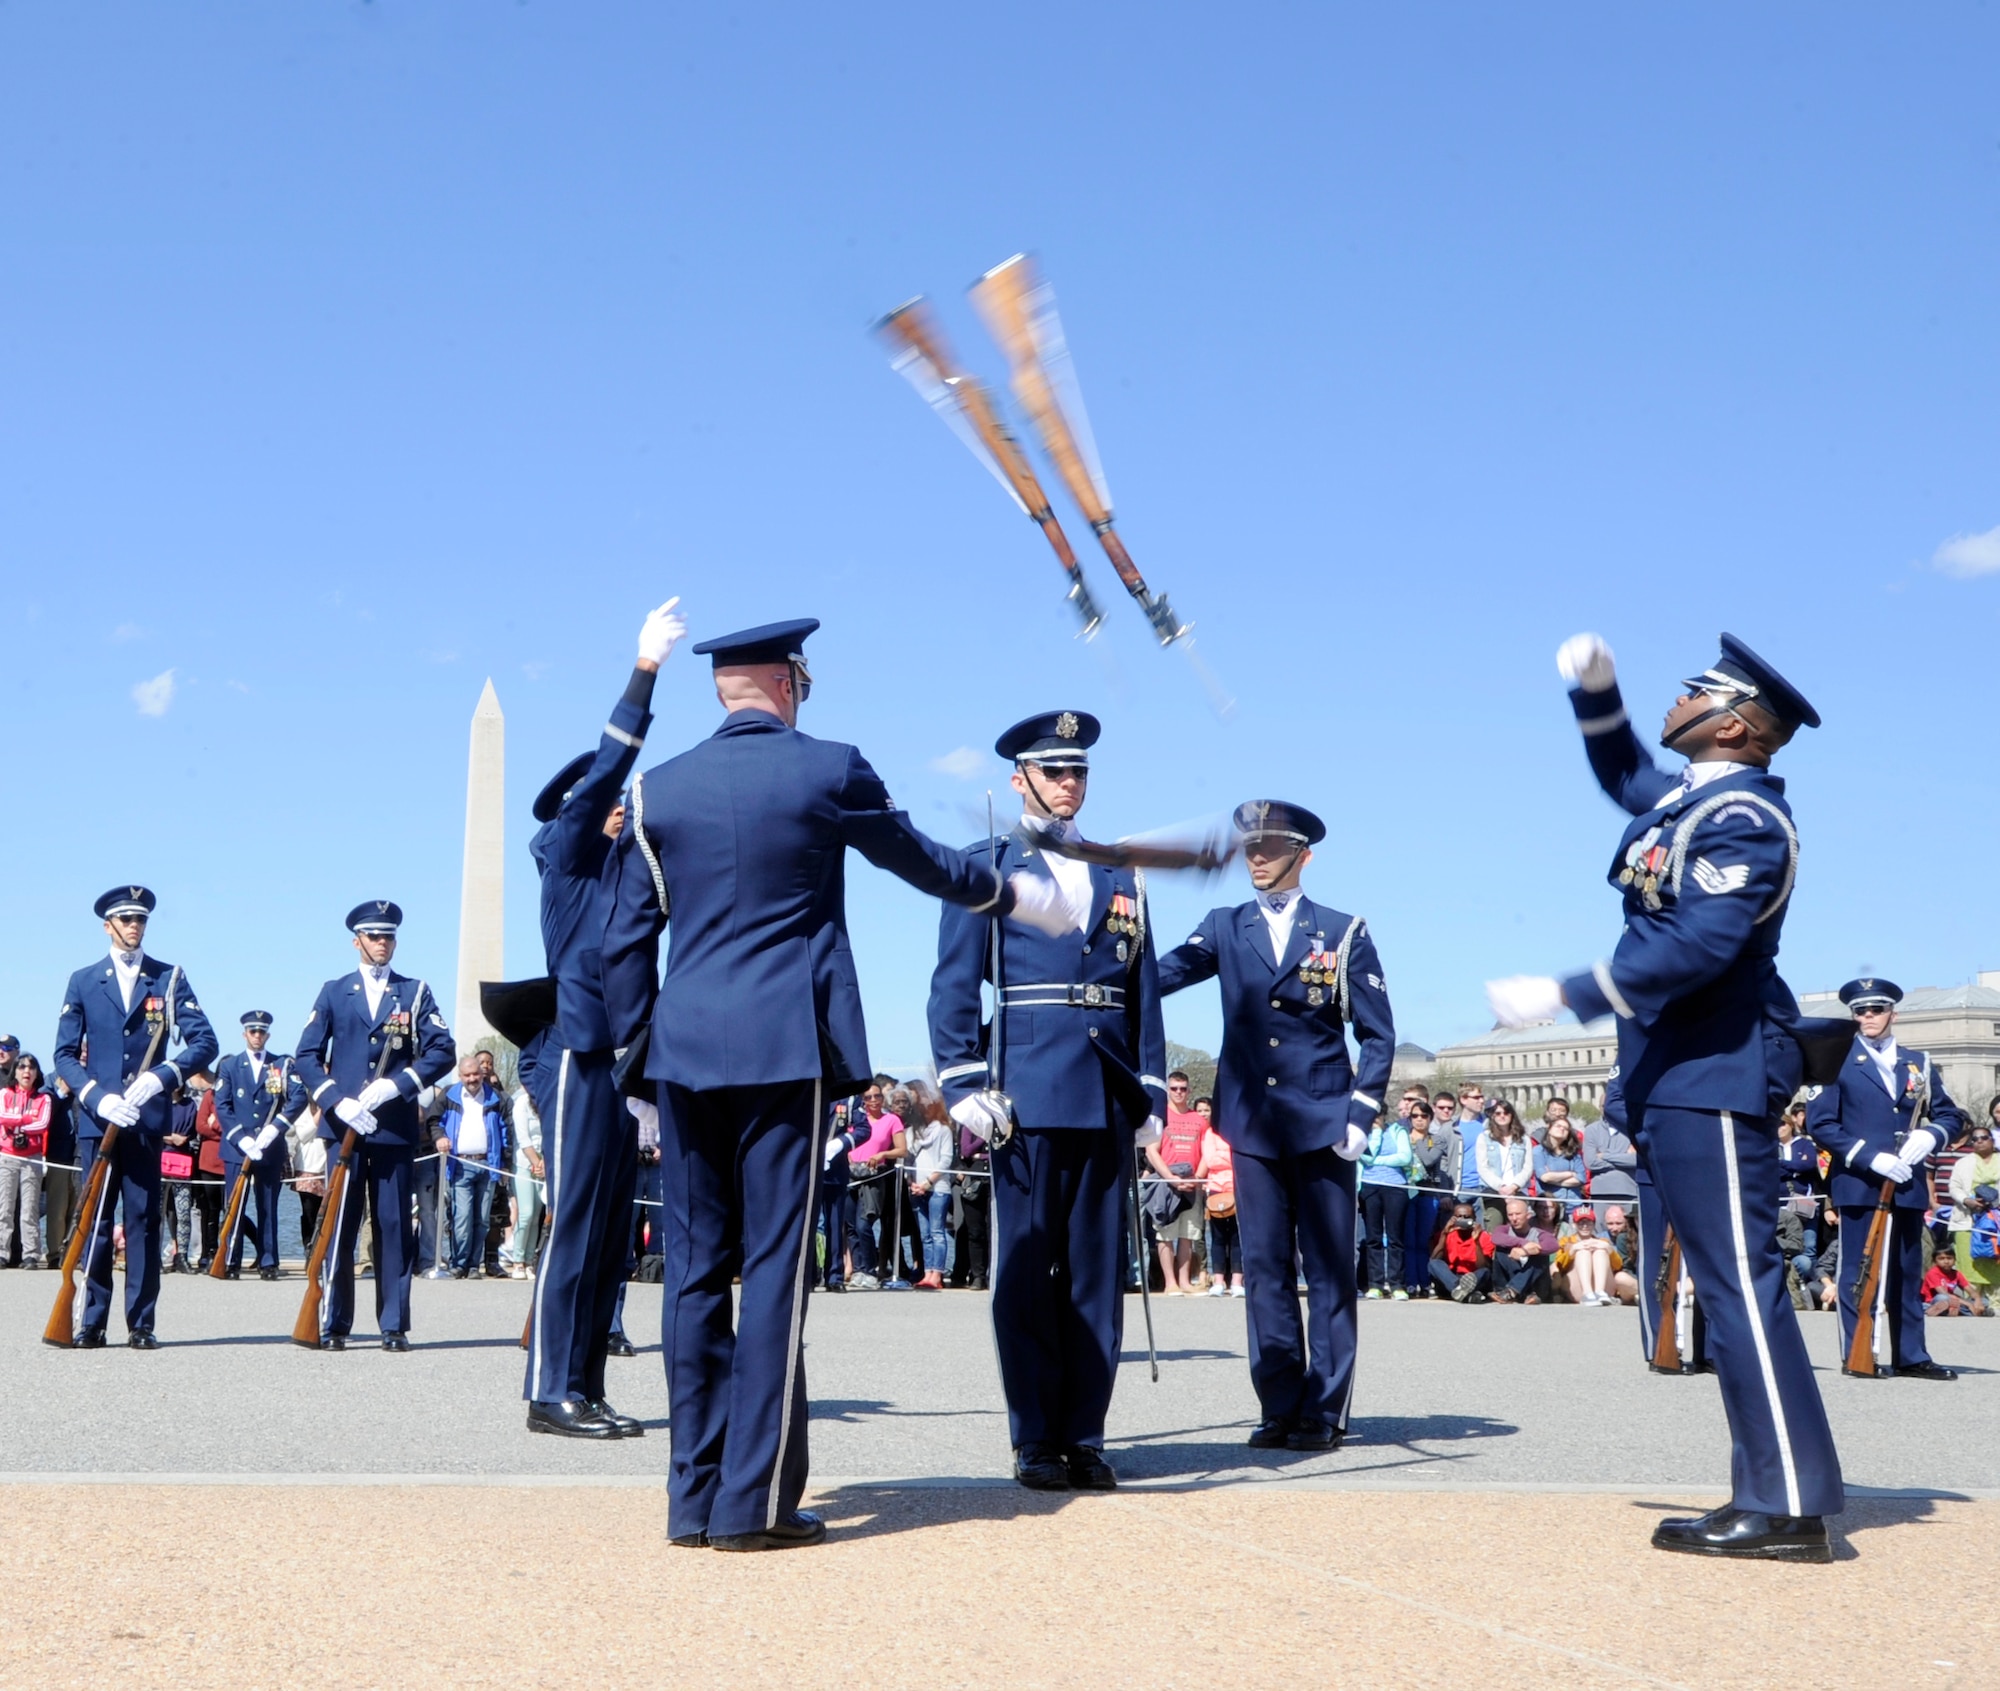 The United Stated Air Force Honor Guard four-man team throws their rifles in the air at the Joint Service Drill Exhibition in Washington, D.C., April 11, 2015. The Old Guard, Army, Navy, Marines, Coast Guard and Naval Academy’s drill team also performed during the event. (U.S. Air Force photo/Airman 1st Class Ryan J. Sonnier)